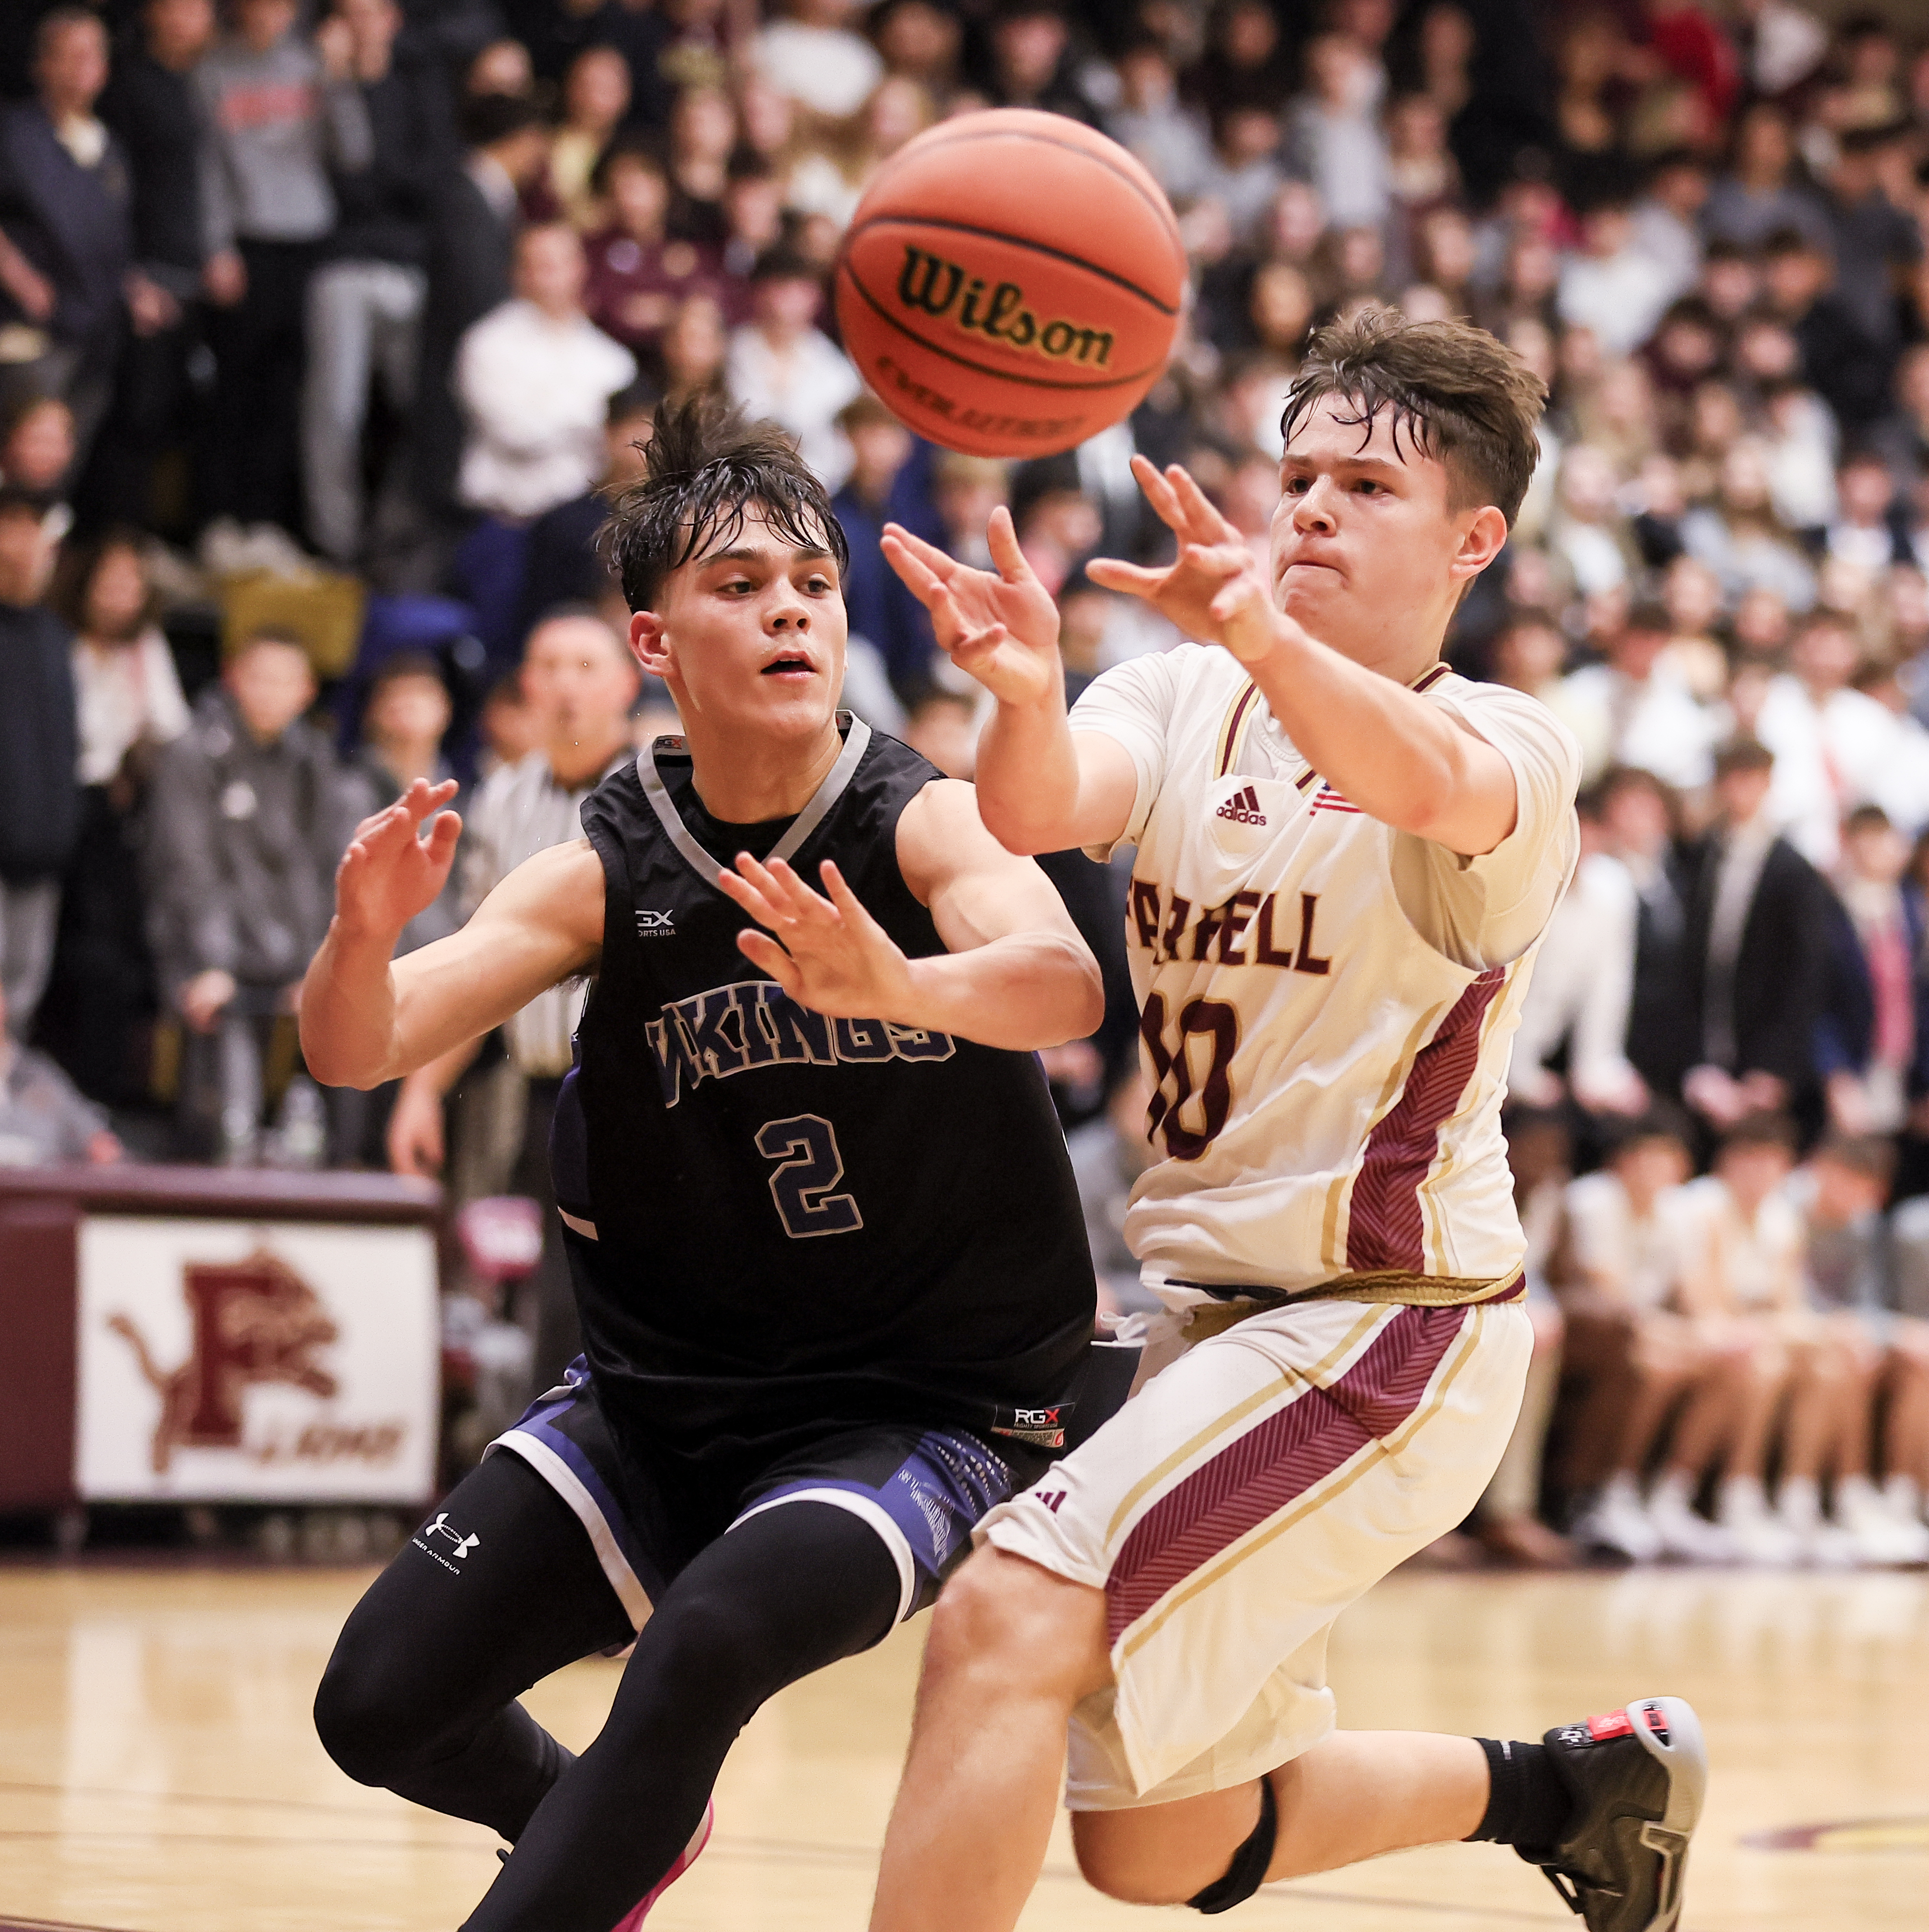 HS boys' hoops roundup: Sea, Farrell each split during holiday tournament  games south of NYC 